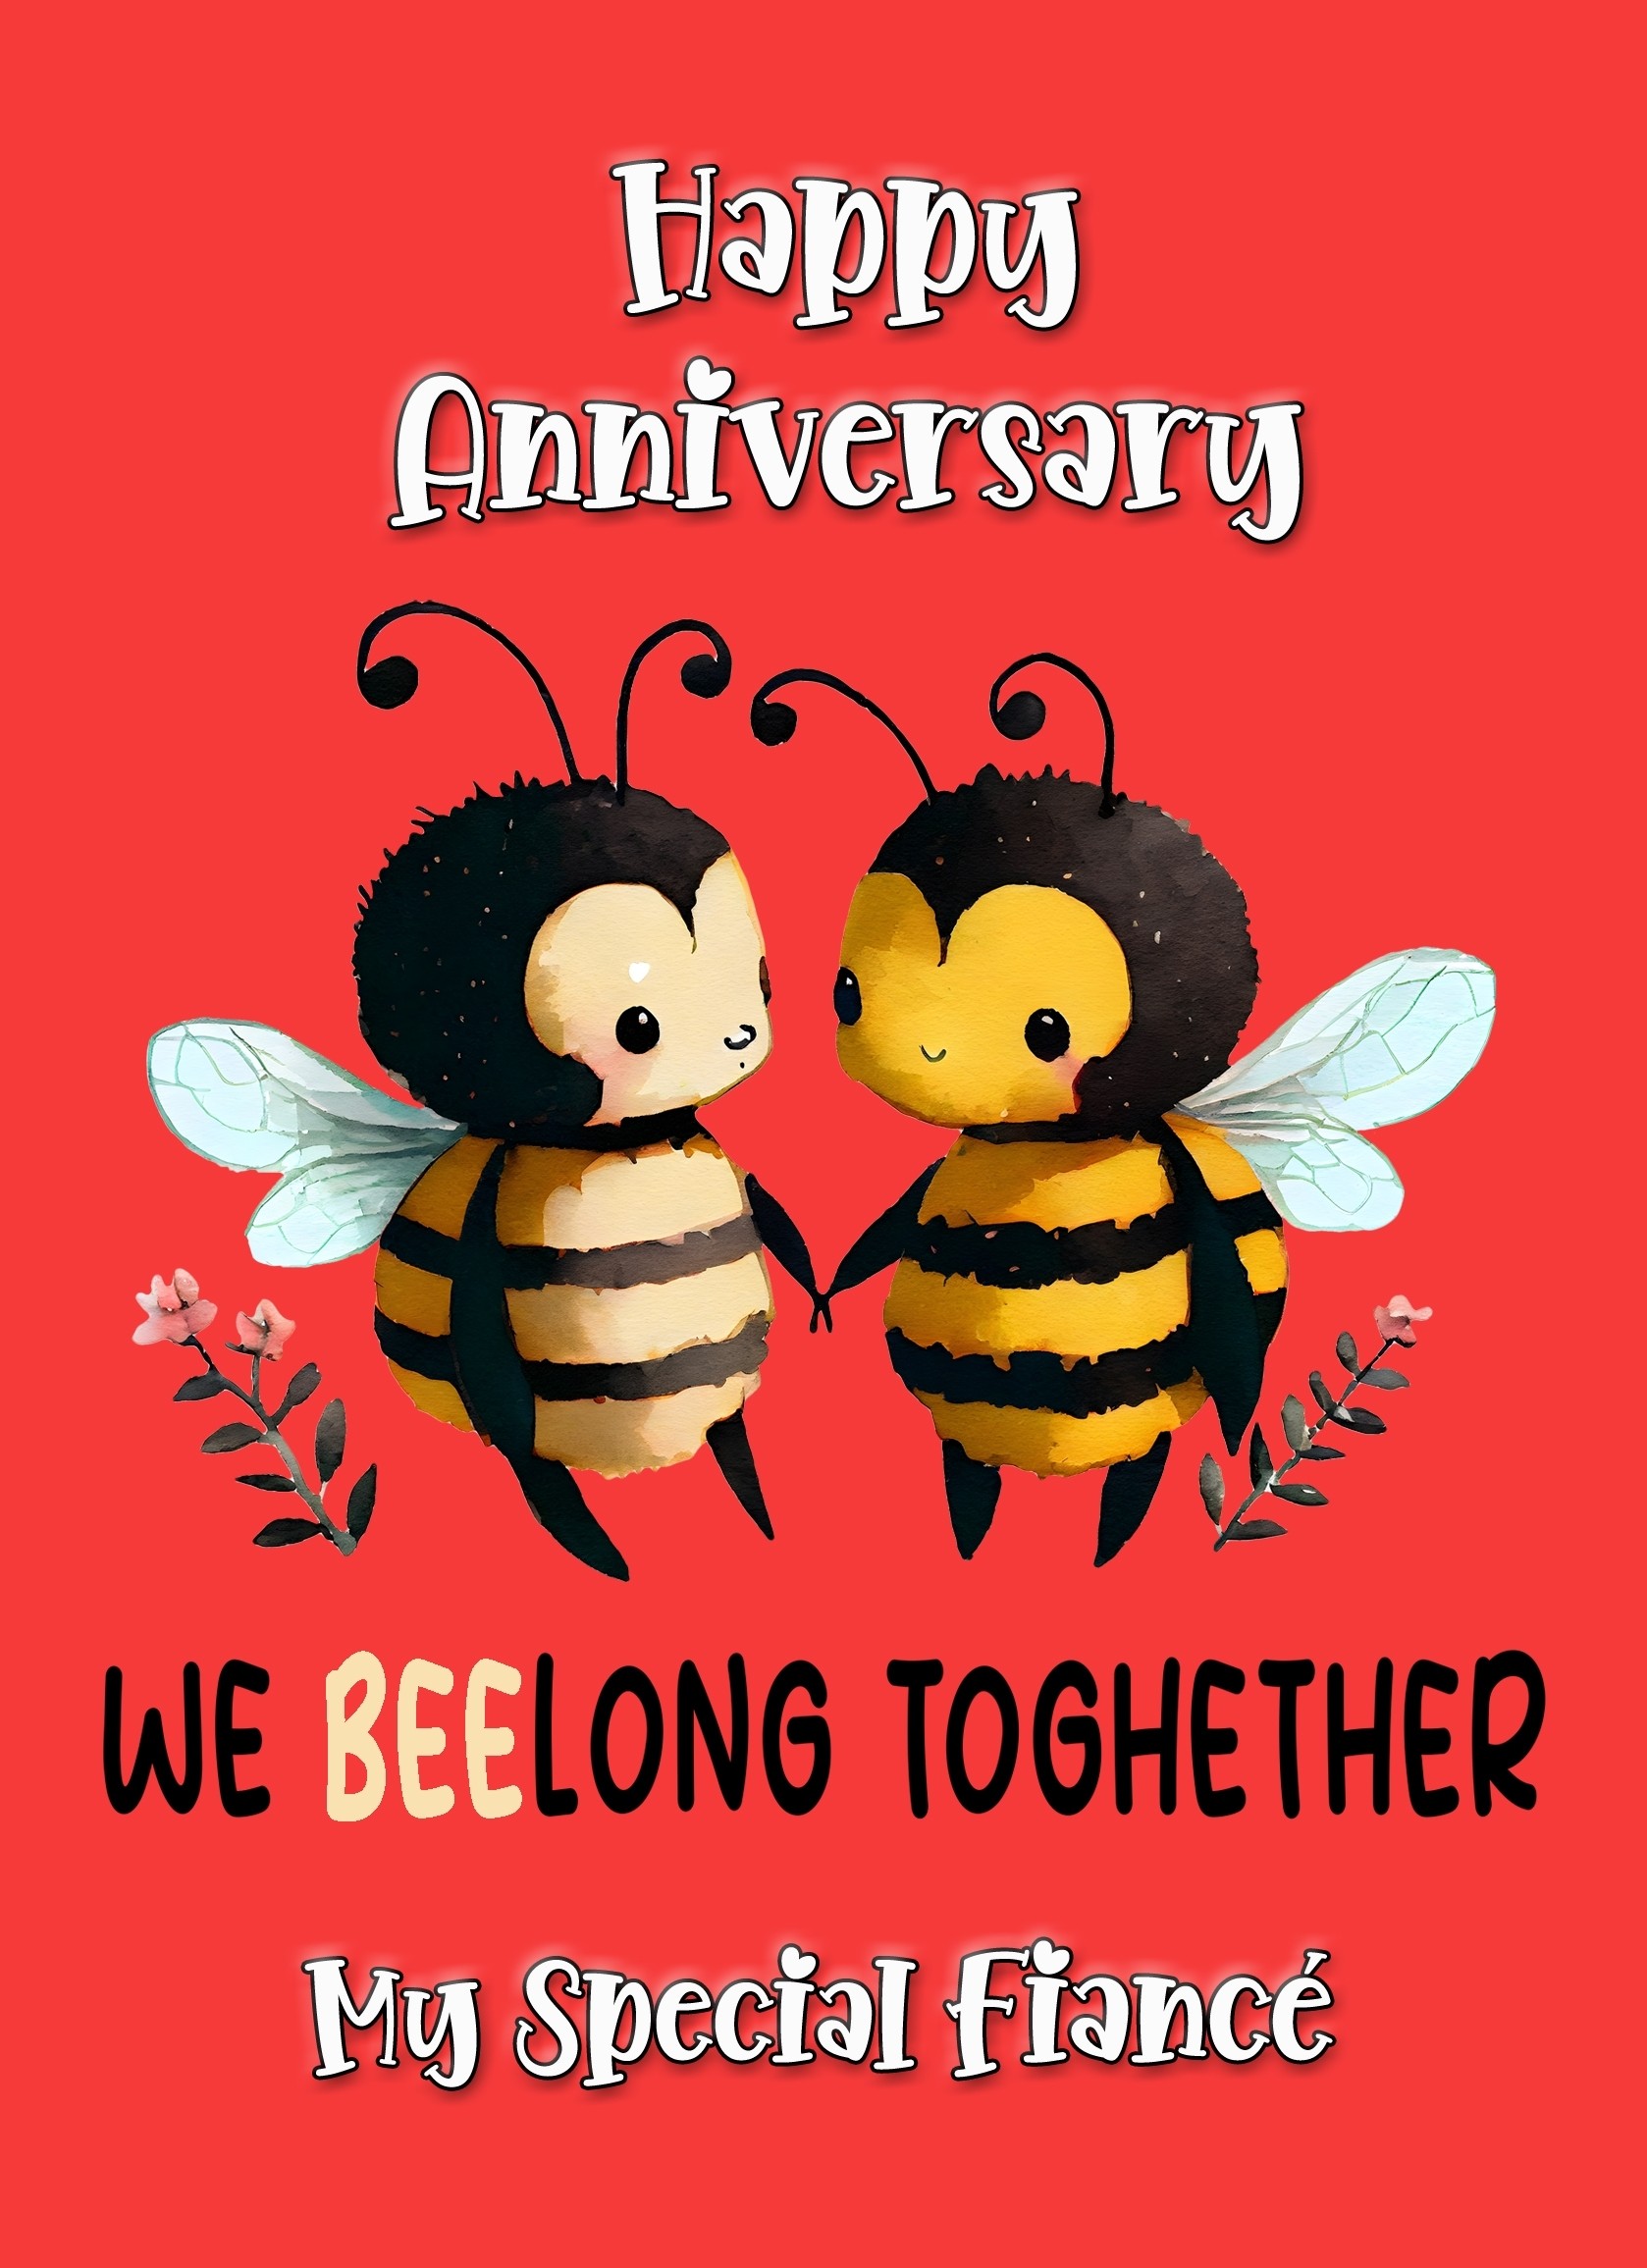 Funny Pun Romantic Anniversary Card for Fiance (Beelong Together)